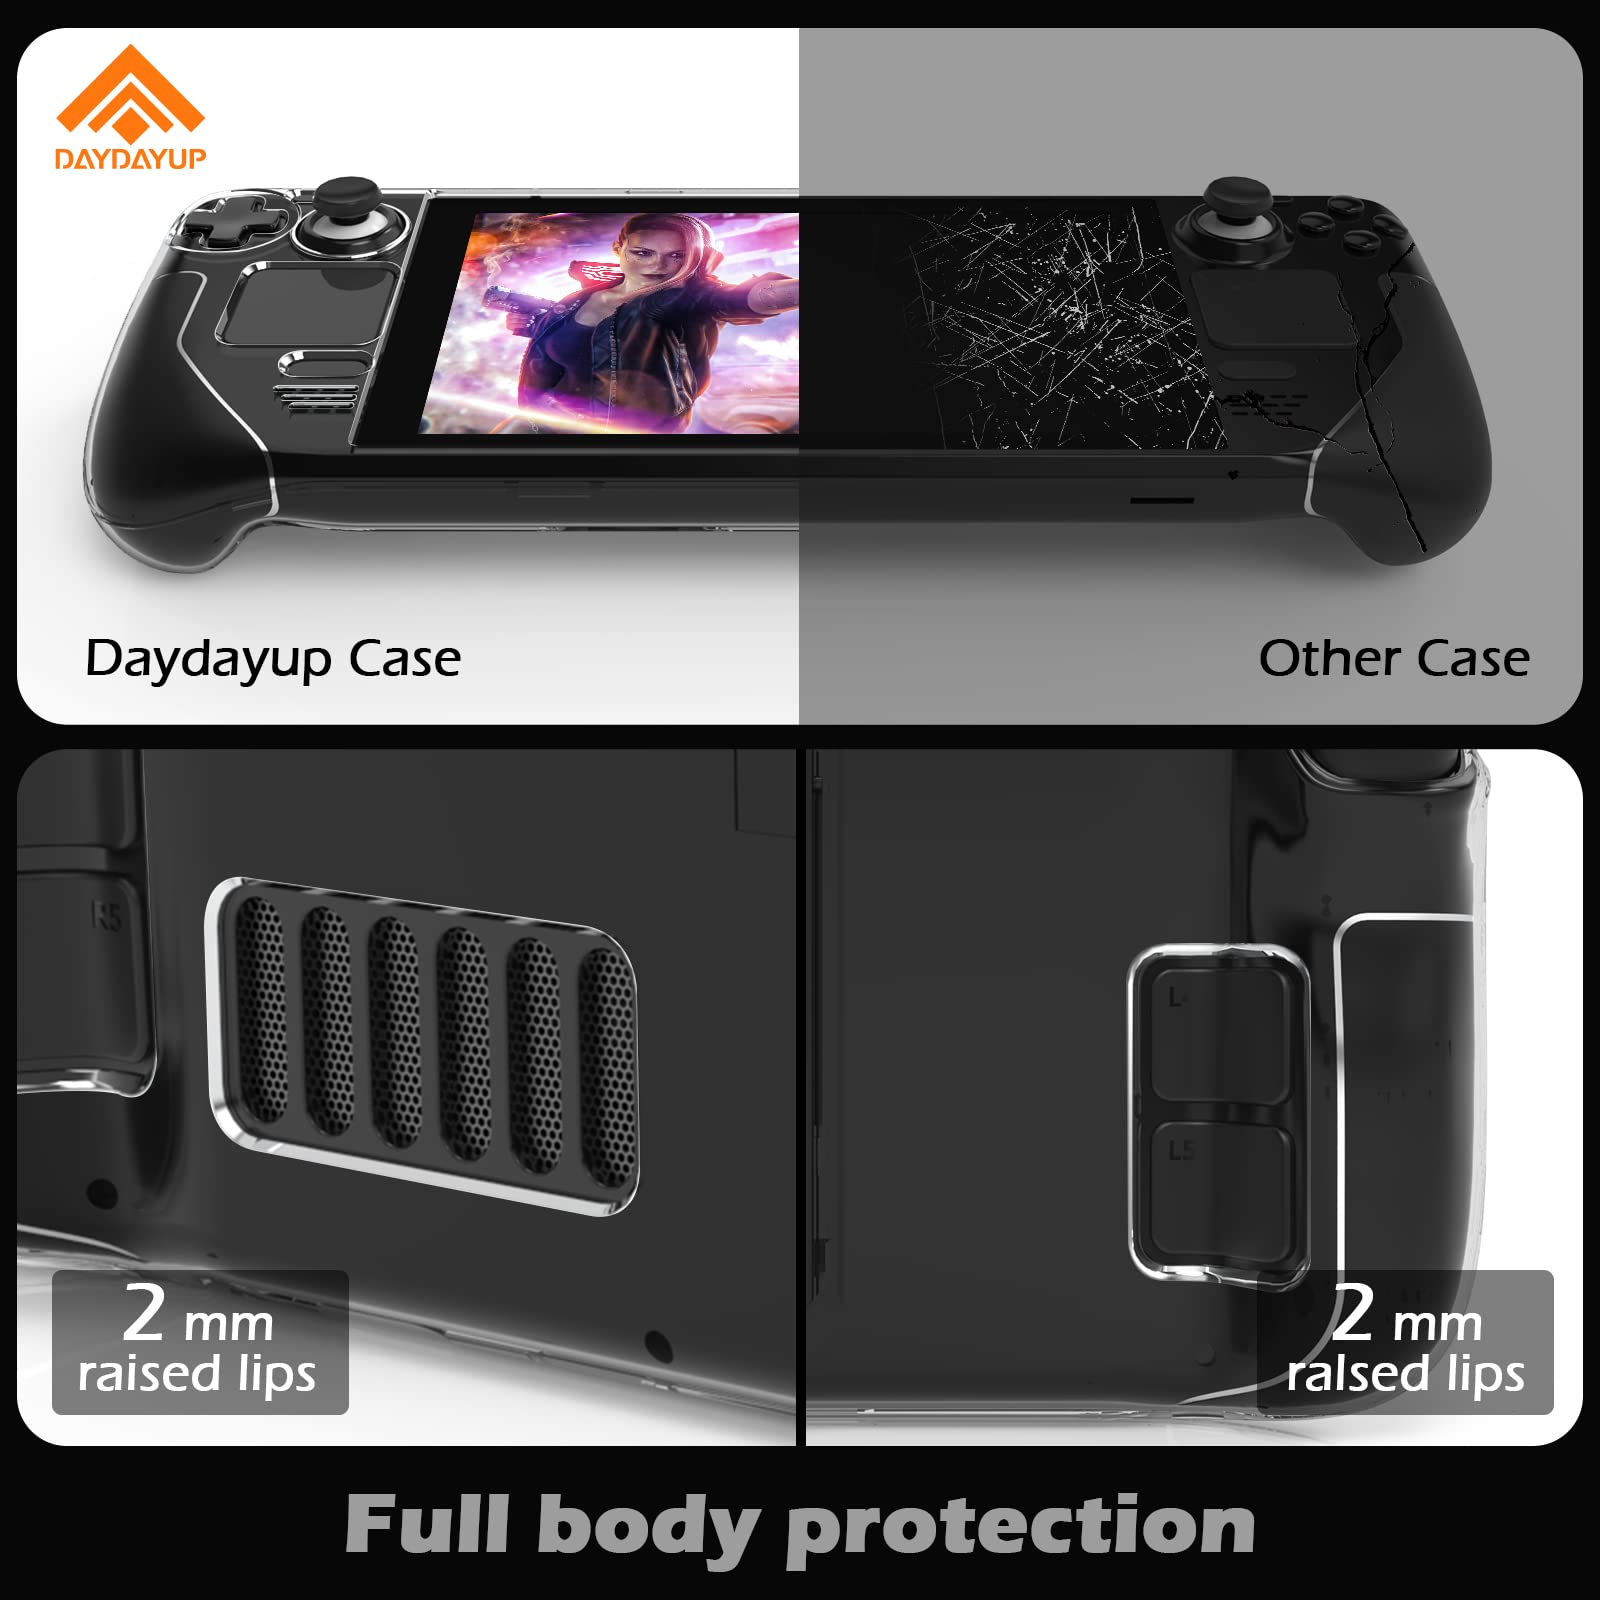 Daydayup Kickstand Protective Case for Steam Deck, Cover Protector with Stand Base, Full Protective Cover Case Compatible with Vavle Steam Deck Accessories, Non-Slip and Anti-Scratch Design, Clear